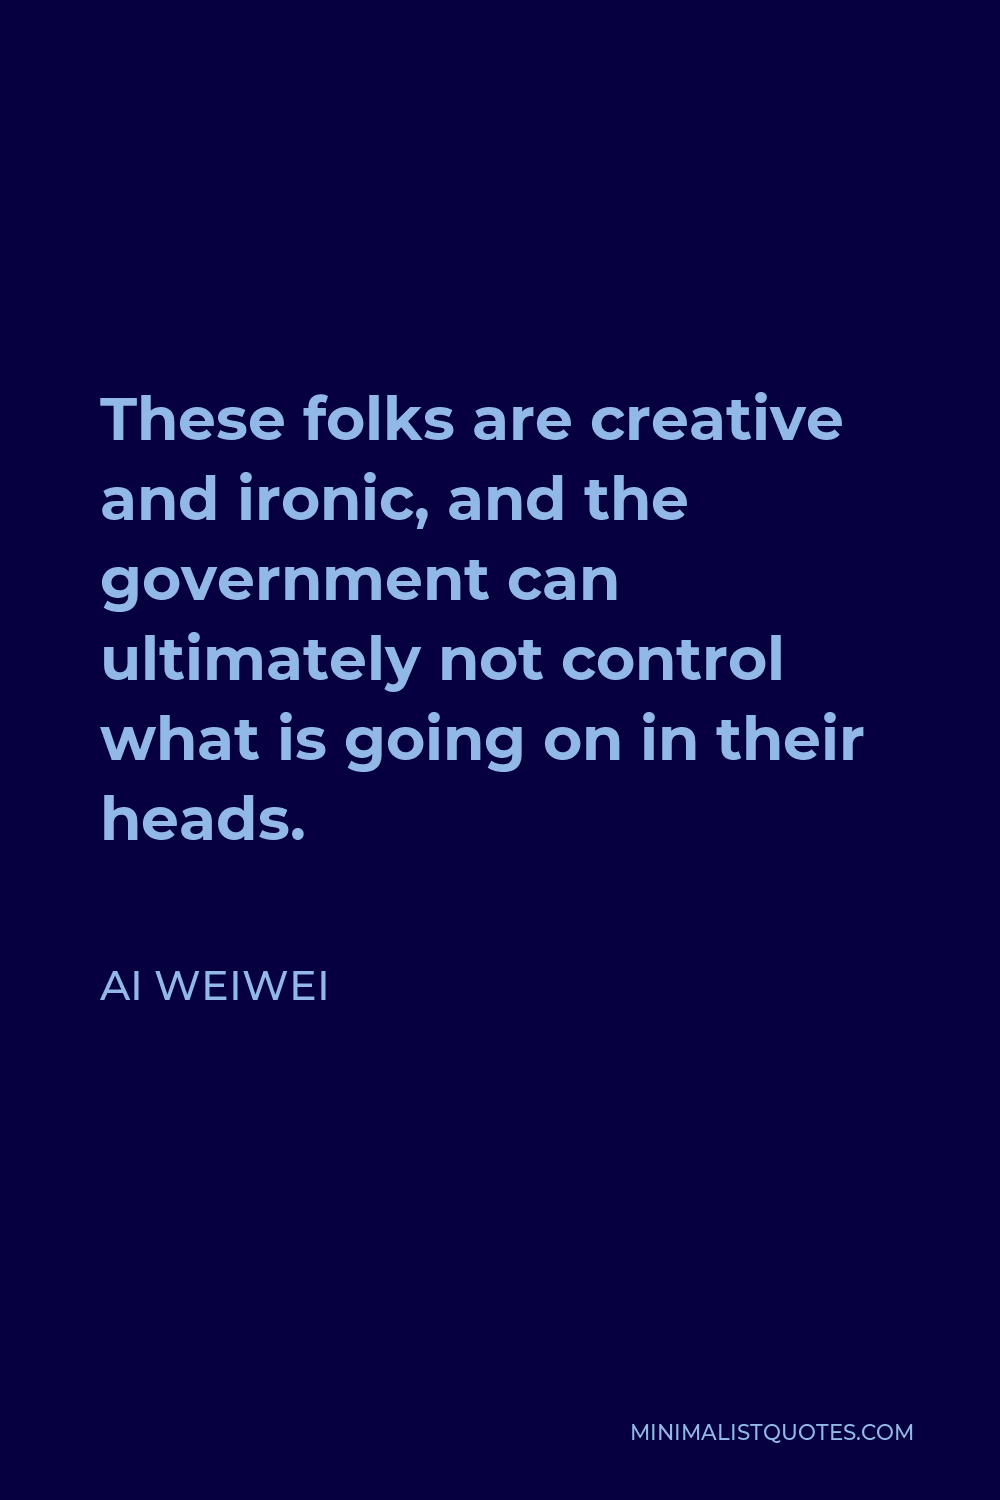 Ai Weiwei Quote - These folks are creative and ironic, and the government can ultimately not control what is going on in their heads.